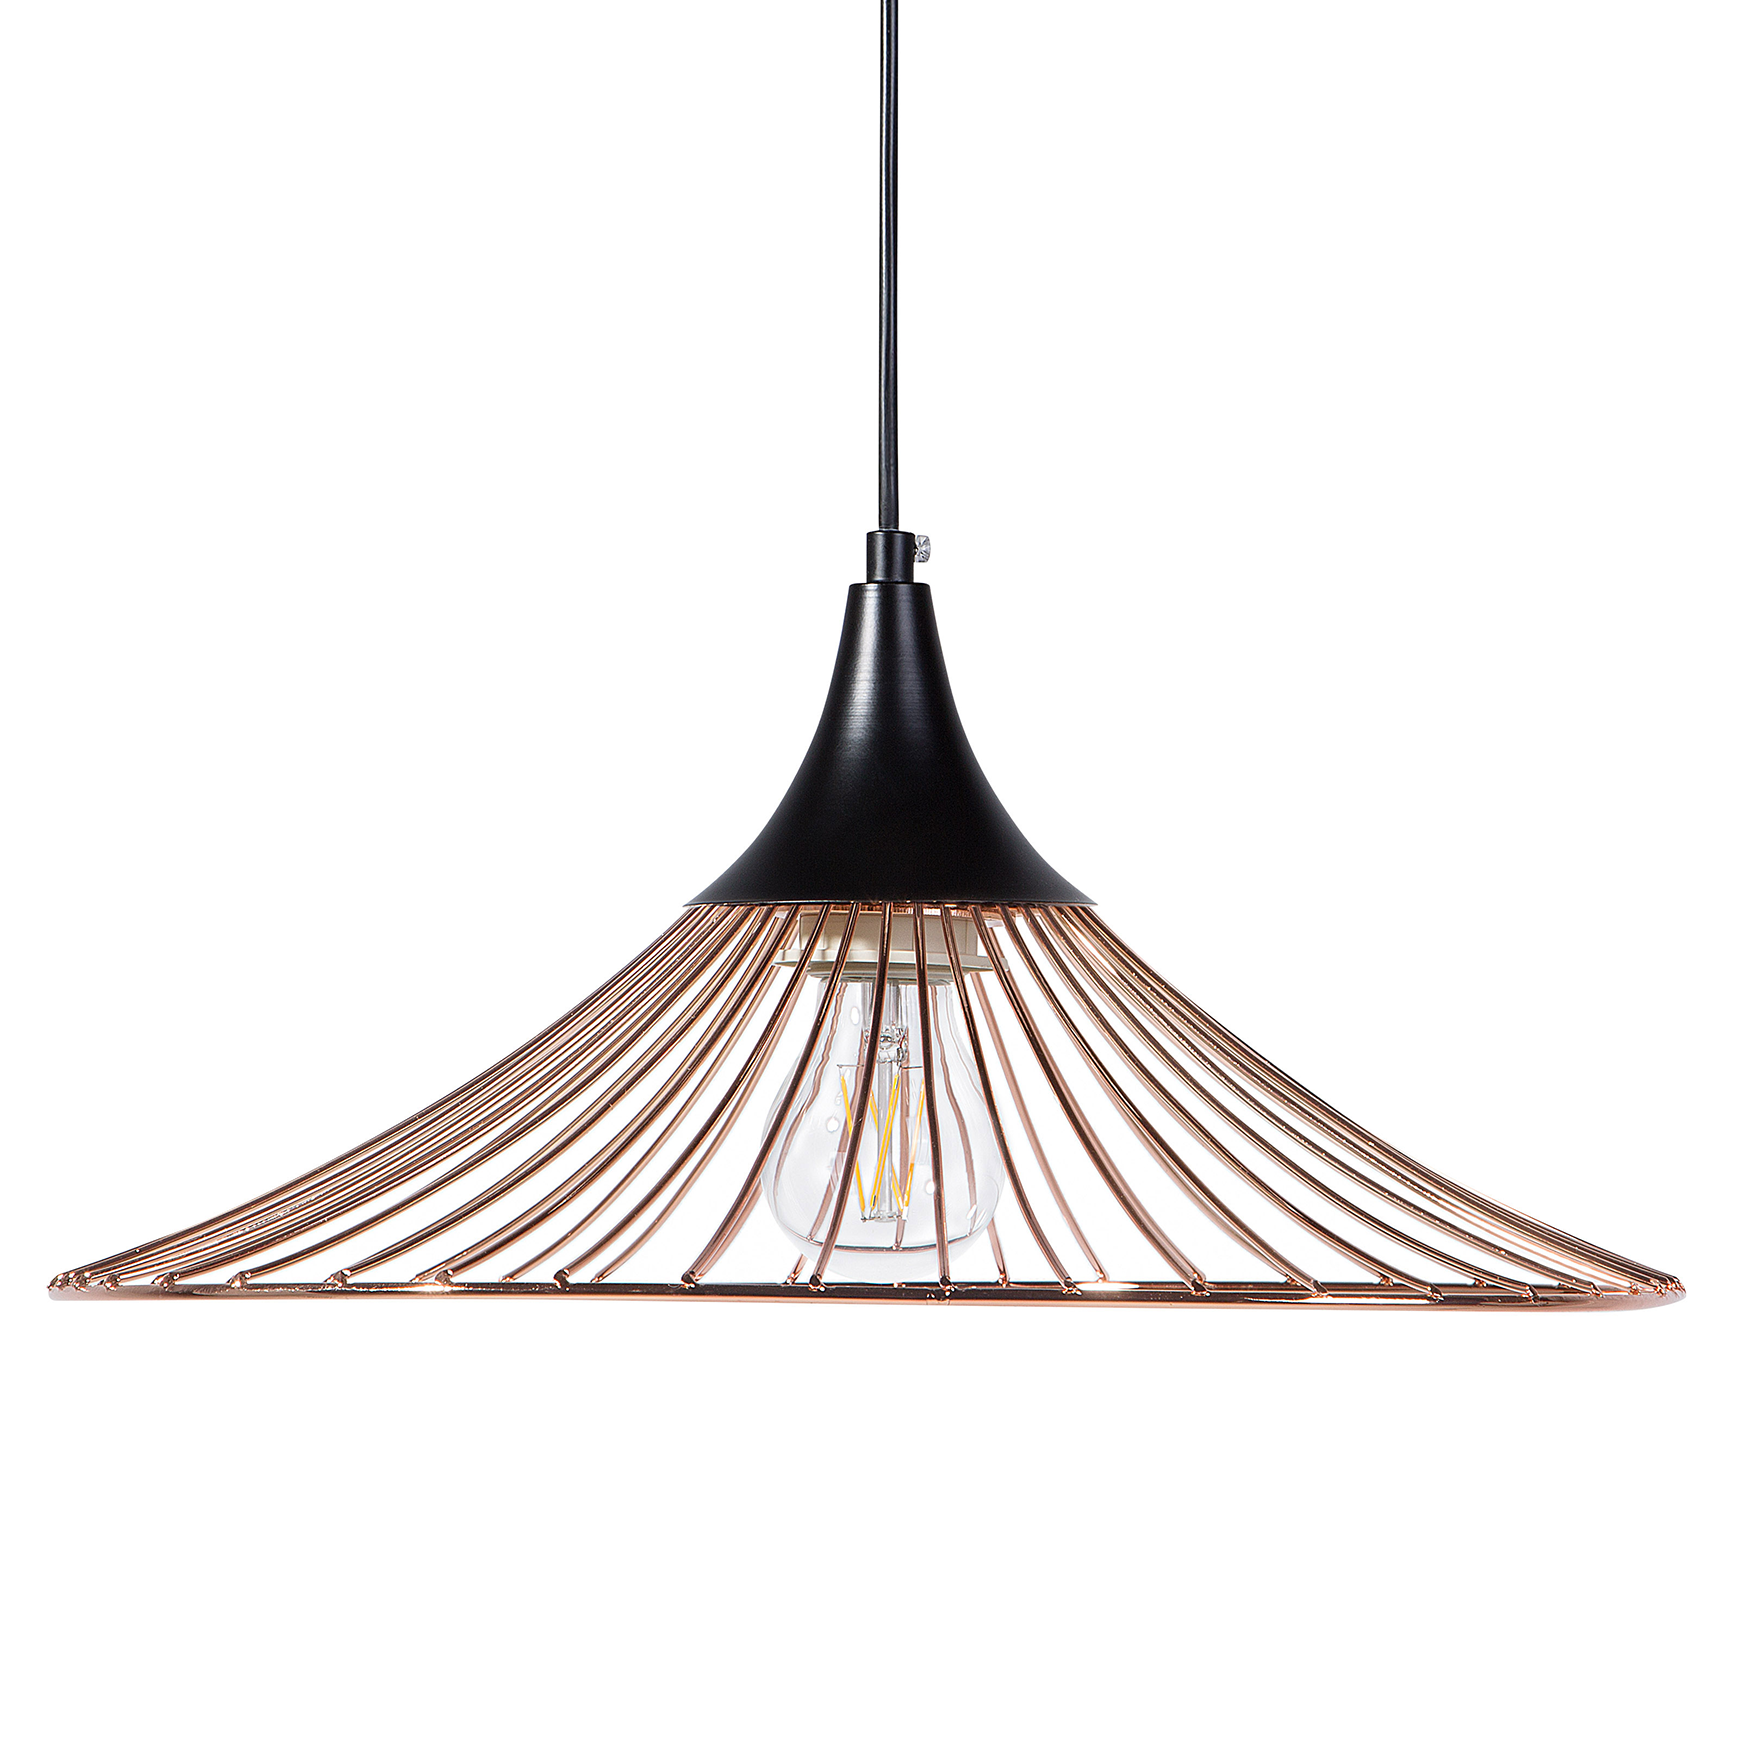 Beliani Hanging Light Pendant Lamp Copper with Black Wire Open Shade Metal Industrial Design